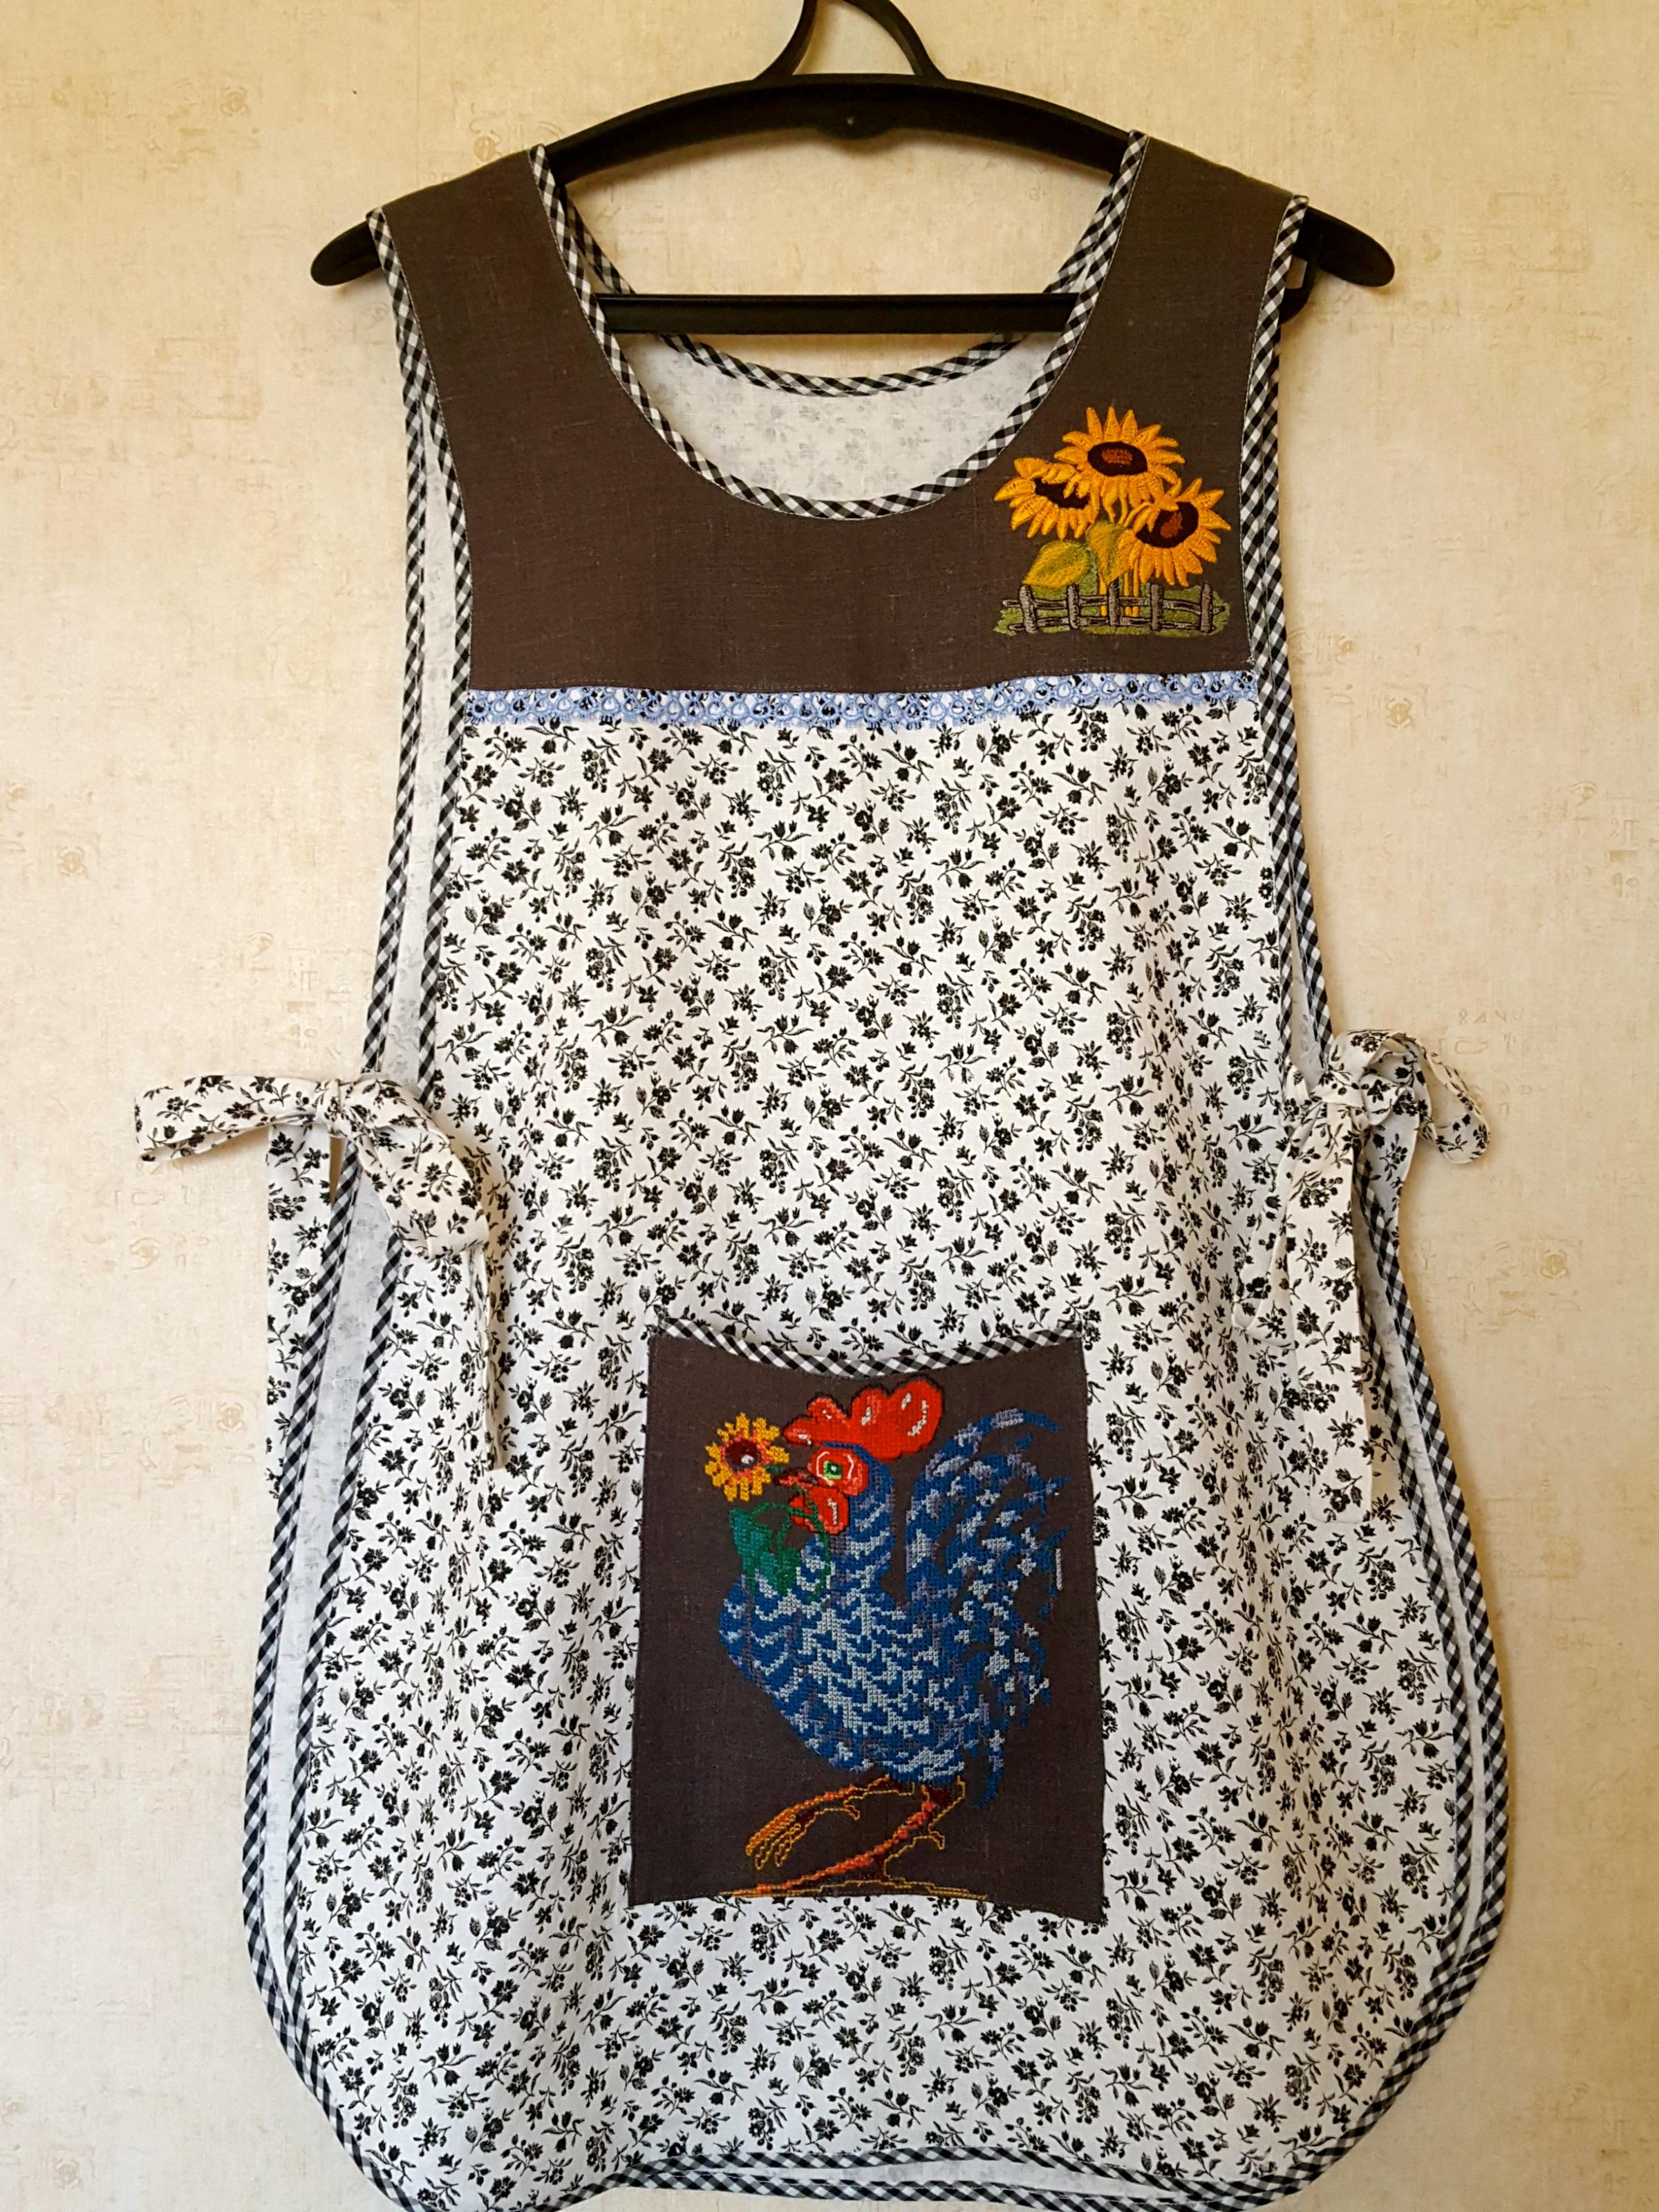 Kitchen apron with Rooster cross stitch free embroidery design